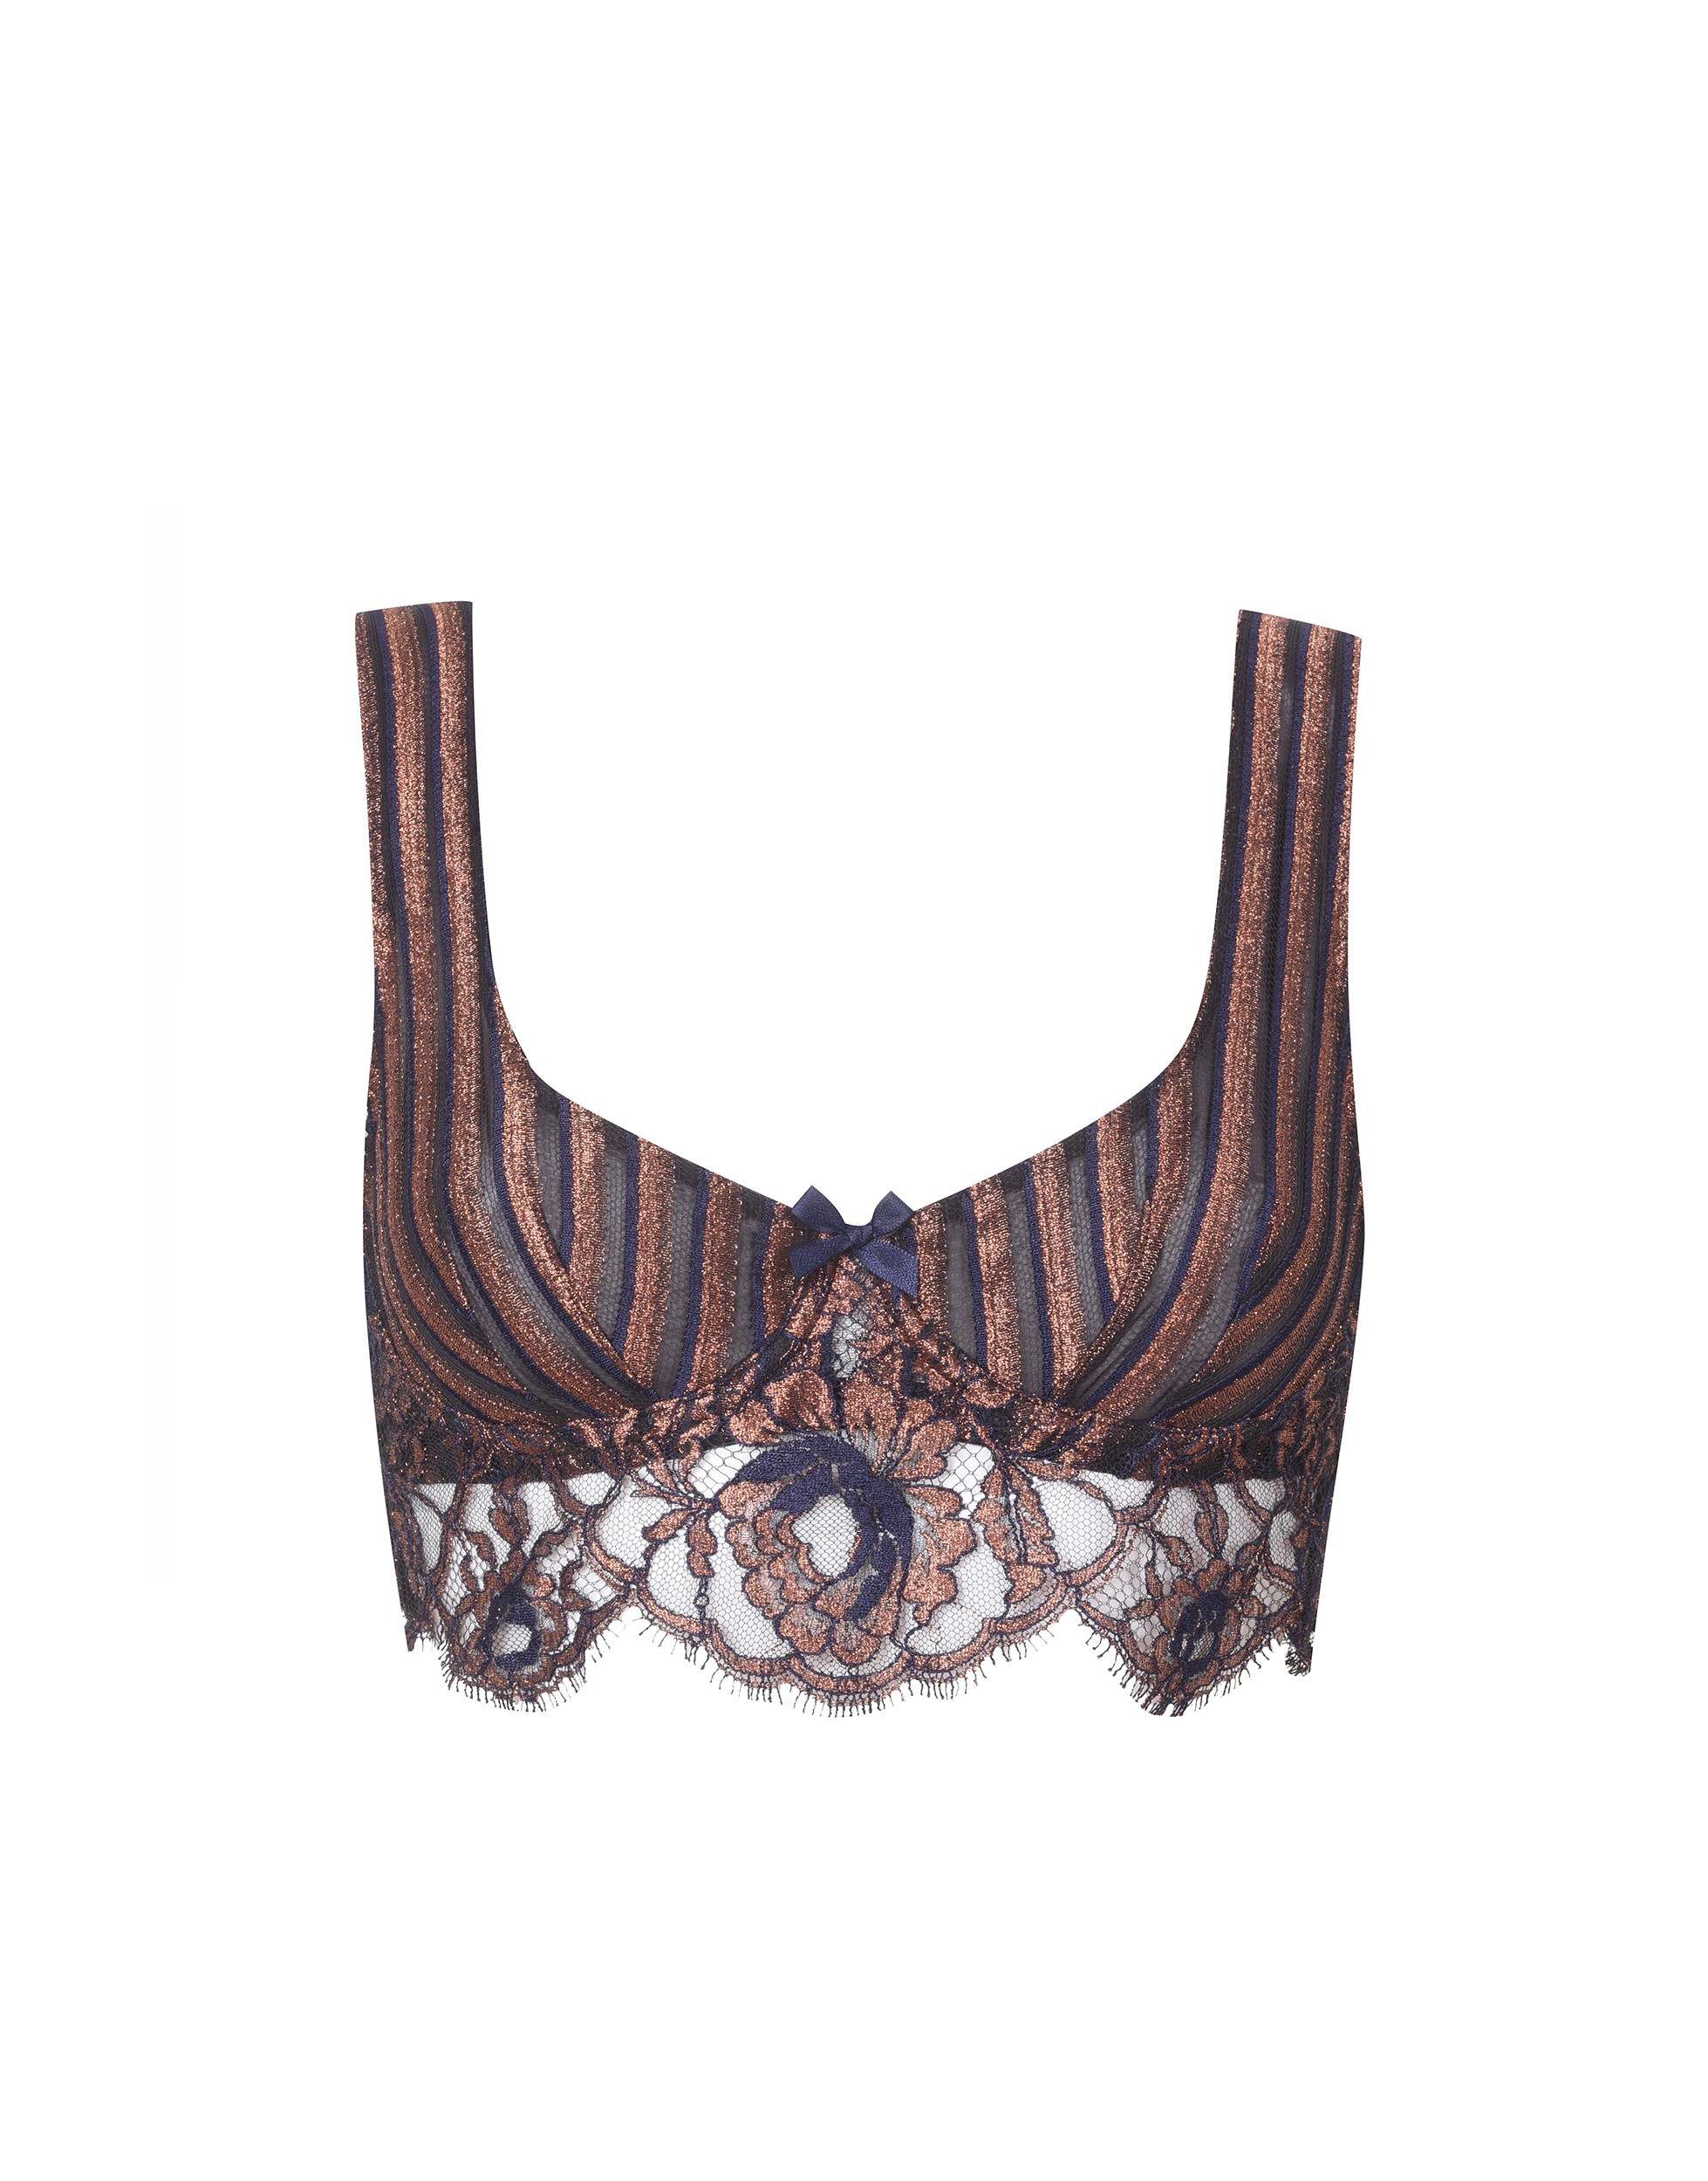 Agent Provocateur Sapphira Plunge Underwired Bra Bronze And Navy from Agent Provocateur on Shop And Ship Worldwide Buy Agent Provocateur Sapphira Plunge Underwired Bra Bronze And Navy by Agent Provocateur shipped